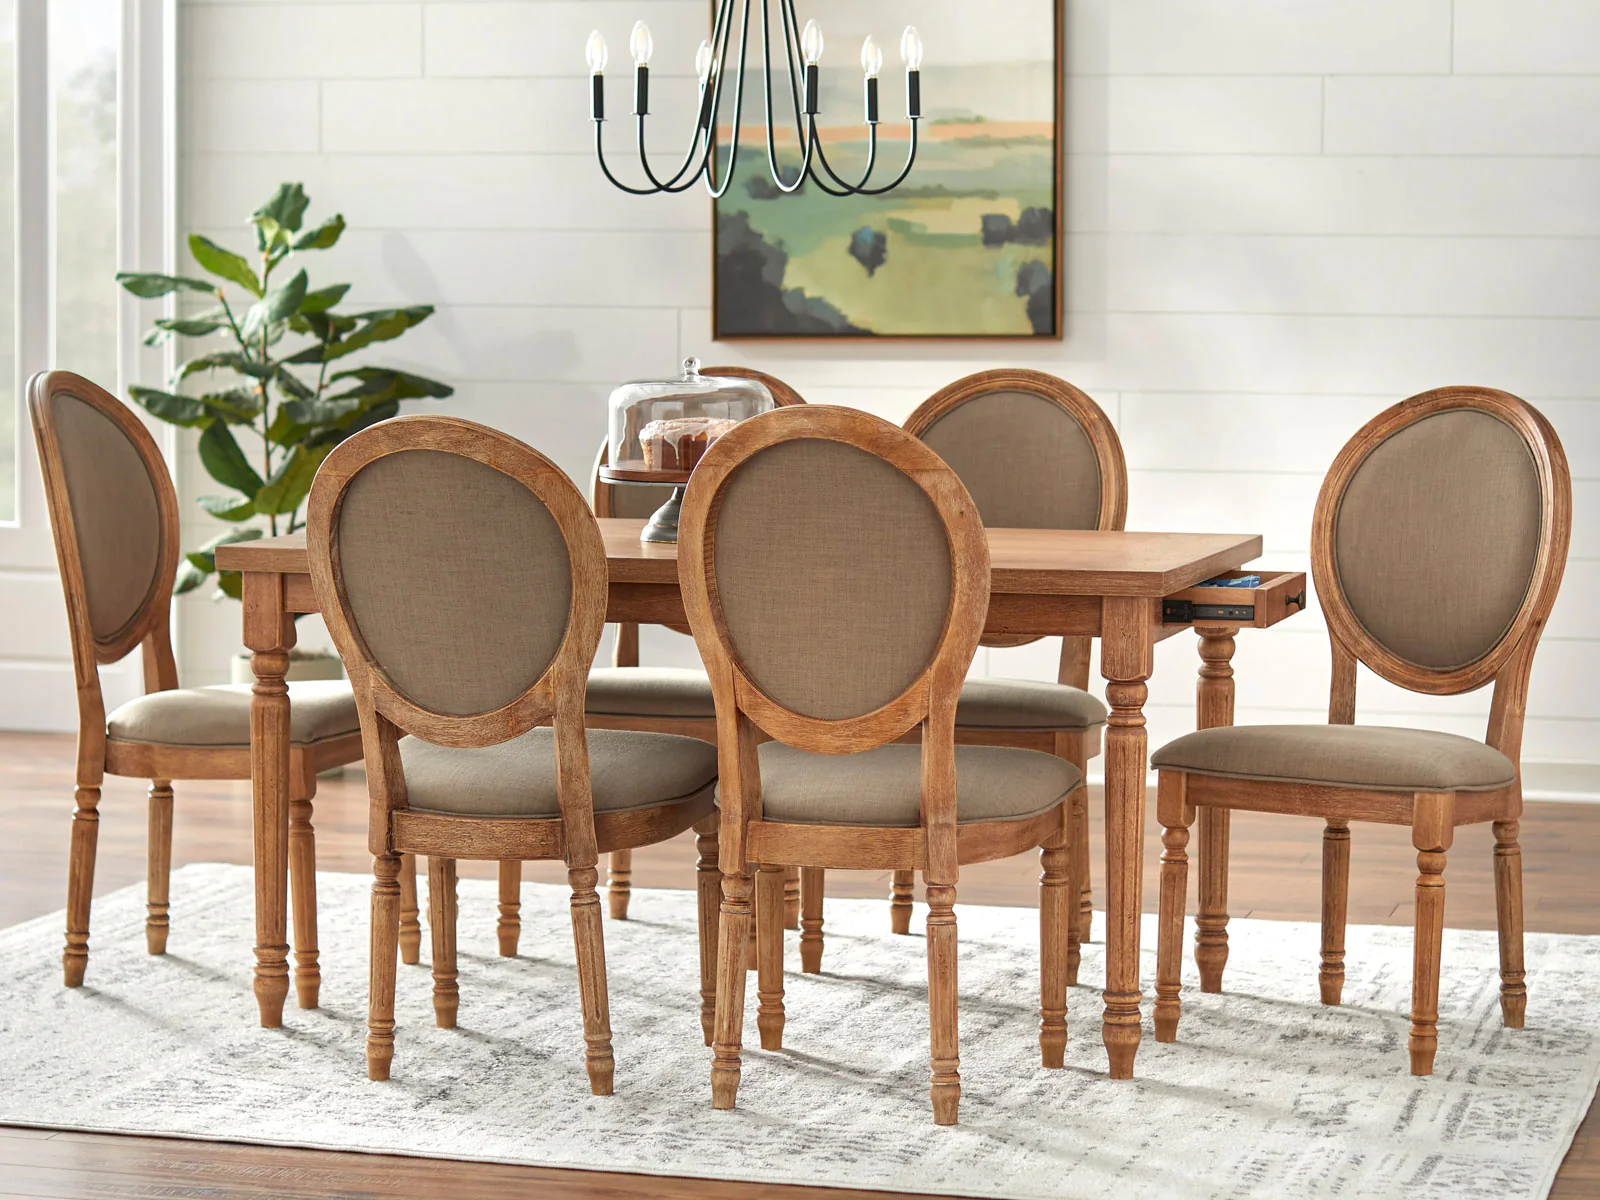 Xoteak-Dining-Table-6-Seater-01_bb6fce72-55a2-483e-9d09-2c8682016d02